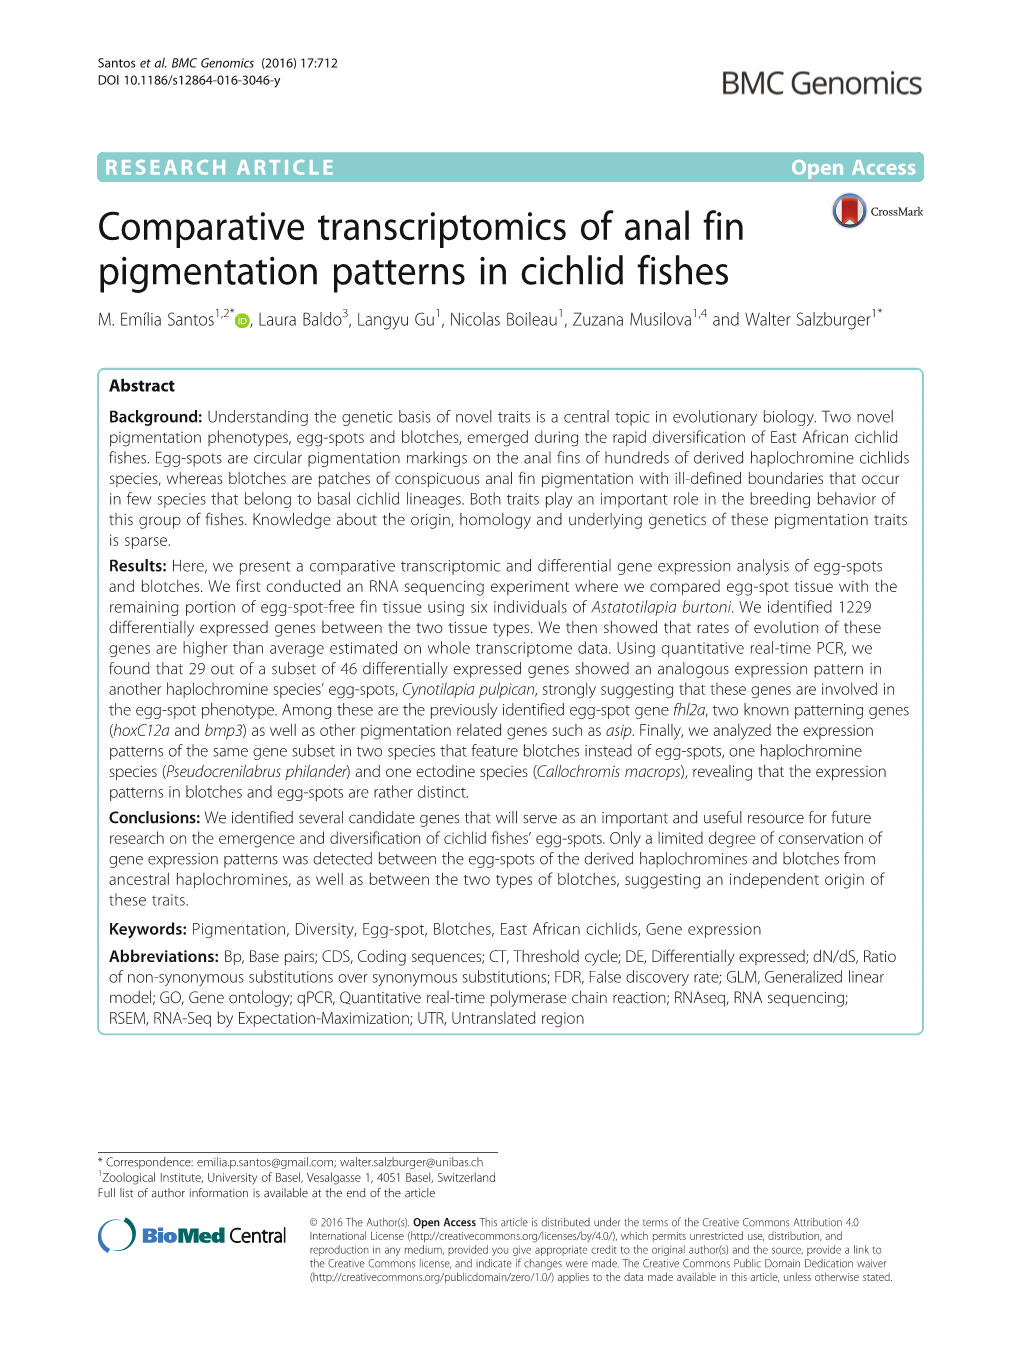 Comparative Transcriptomics of Anal Fin Pigmentation Patterns in Cichlid Fishes M